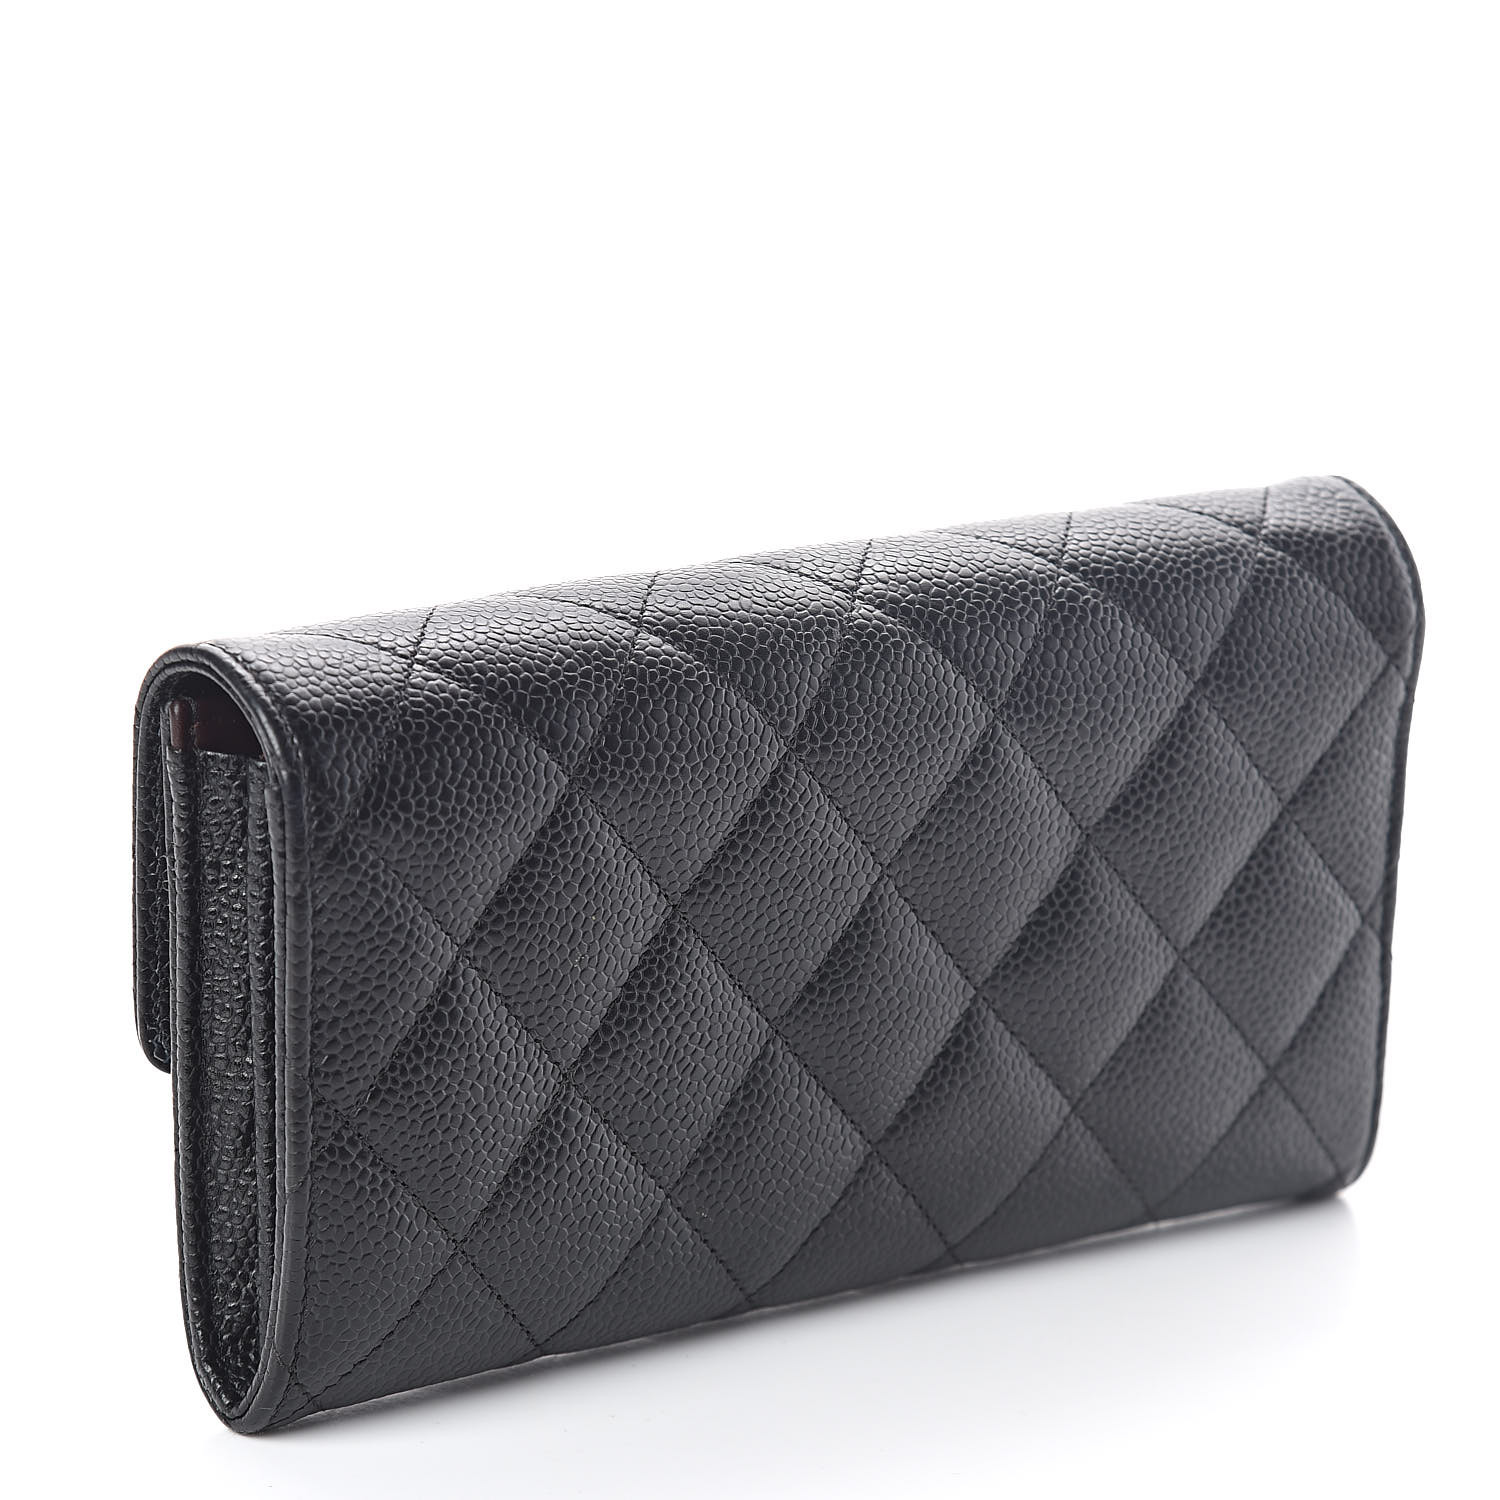 CHANEL Caviar Quilted Large Gusset Flap Wallet Black 509217